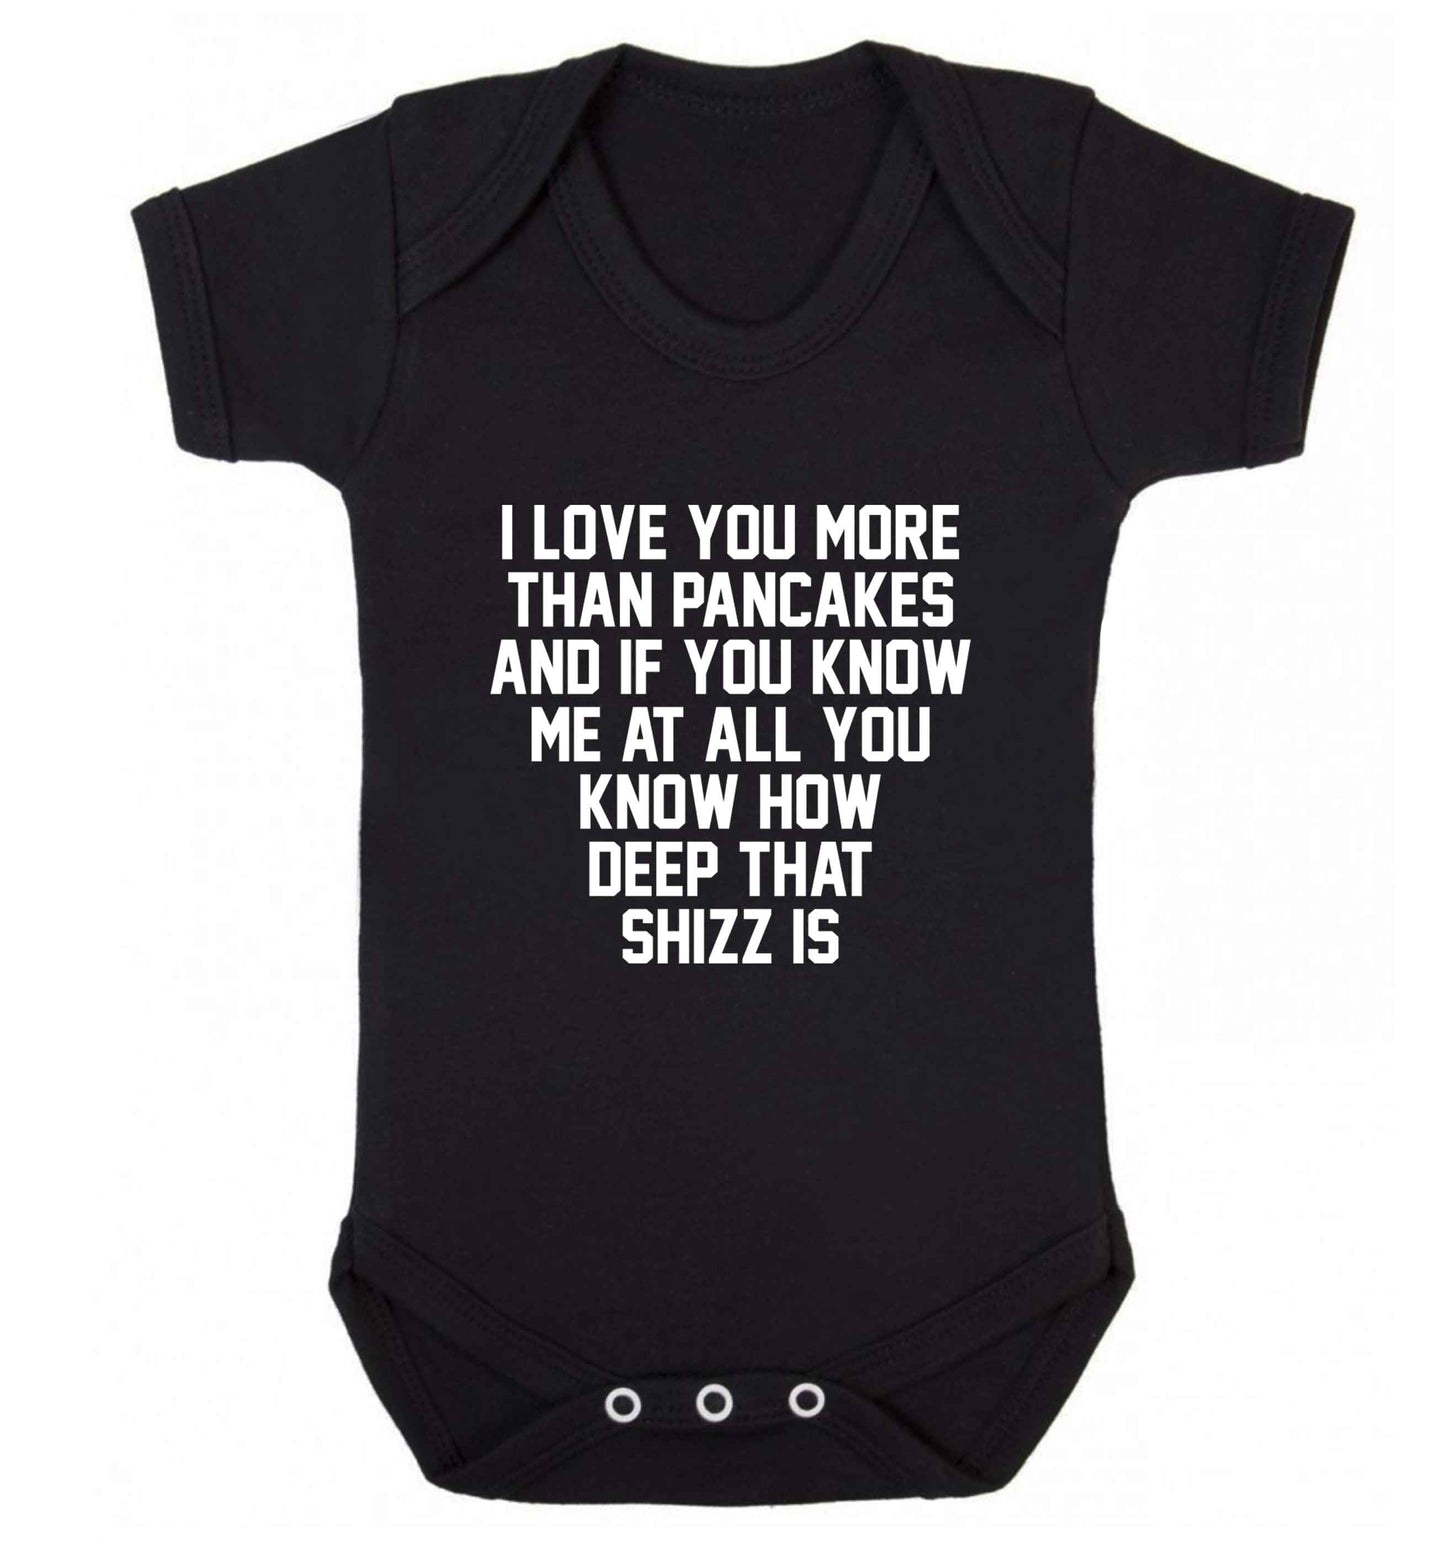 I love you more than pancakes and if you know me at all you know how deep that shizz is baby vest black 18-24 months